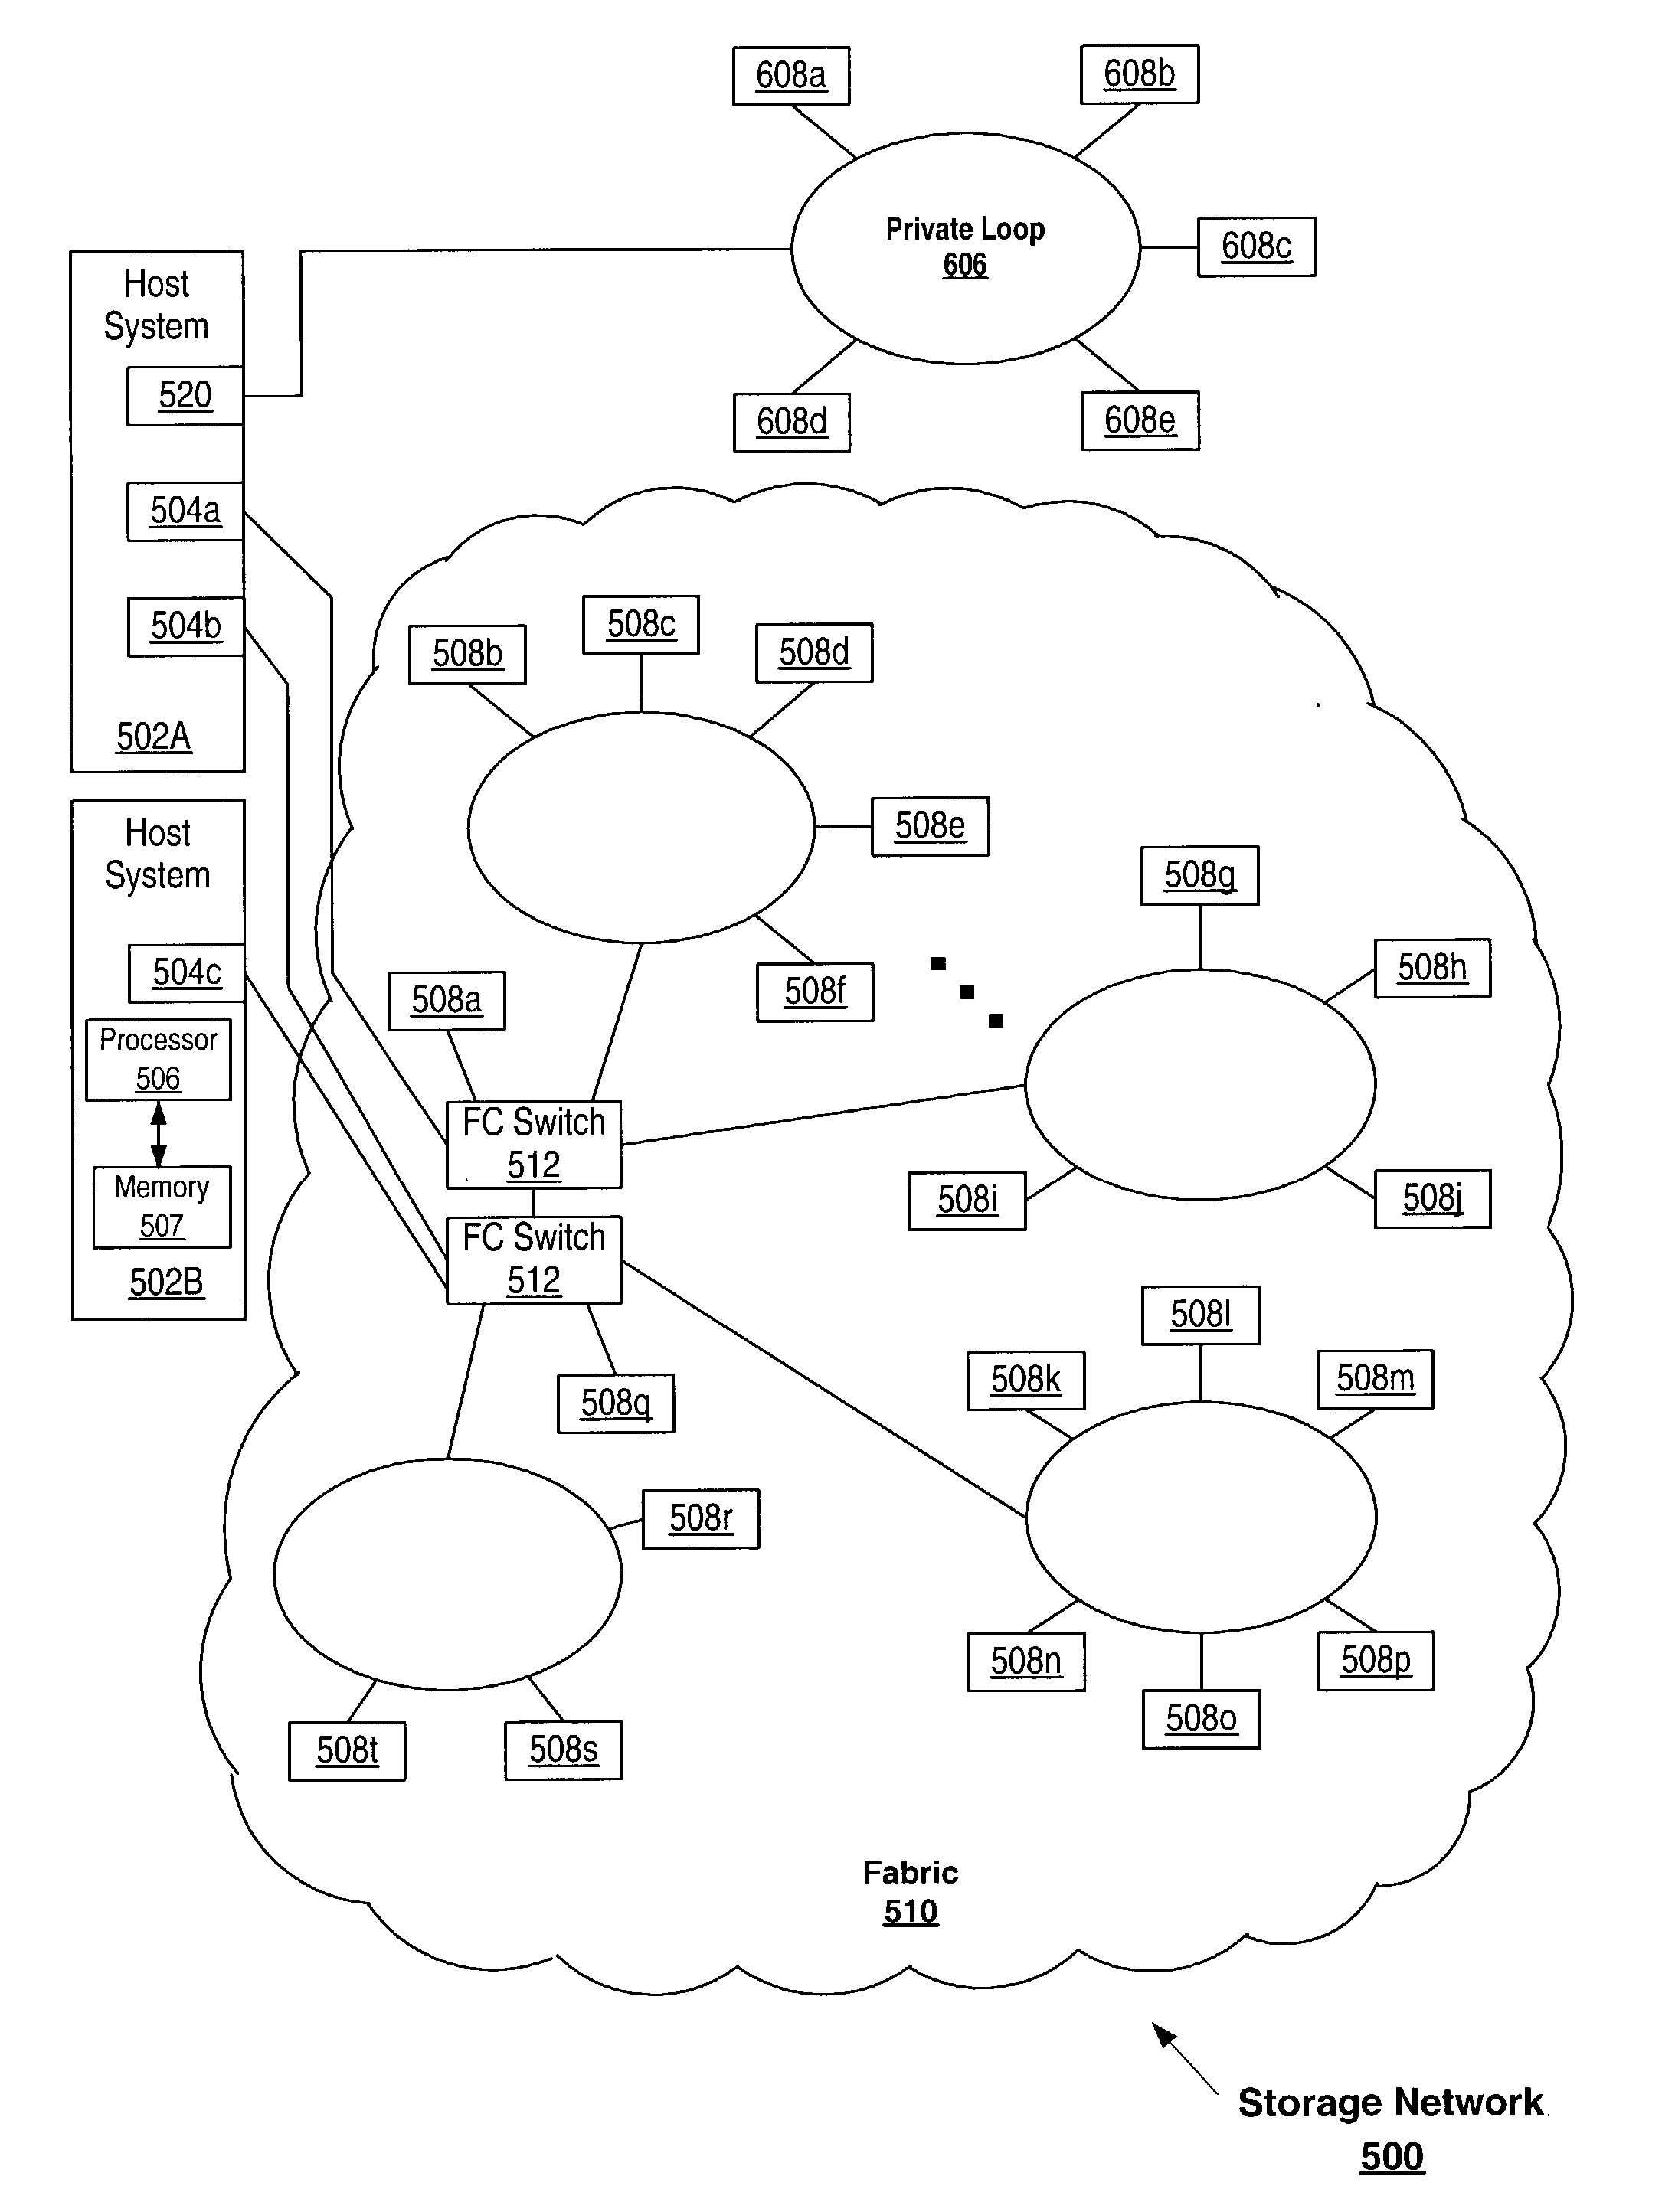 System and method for storage of operational parameters on components